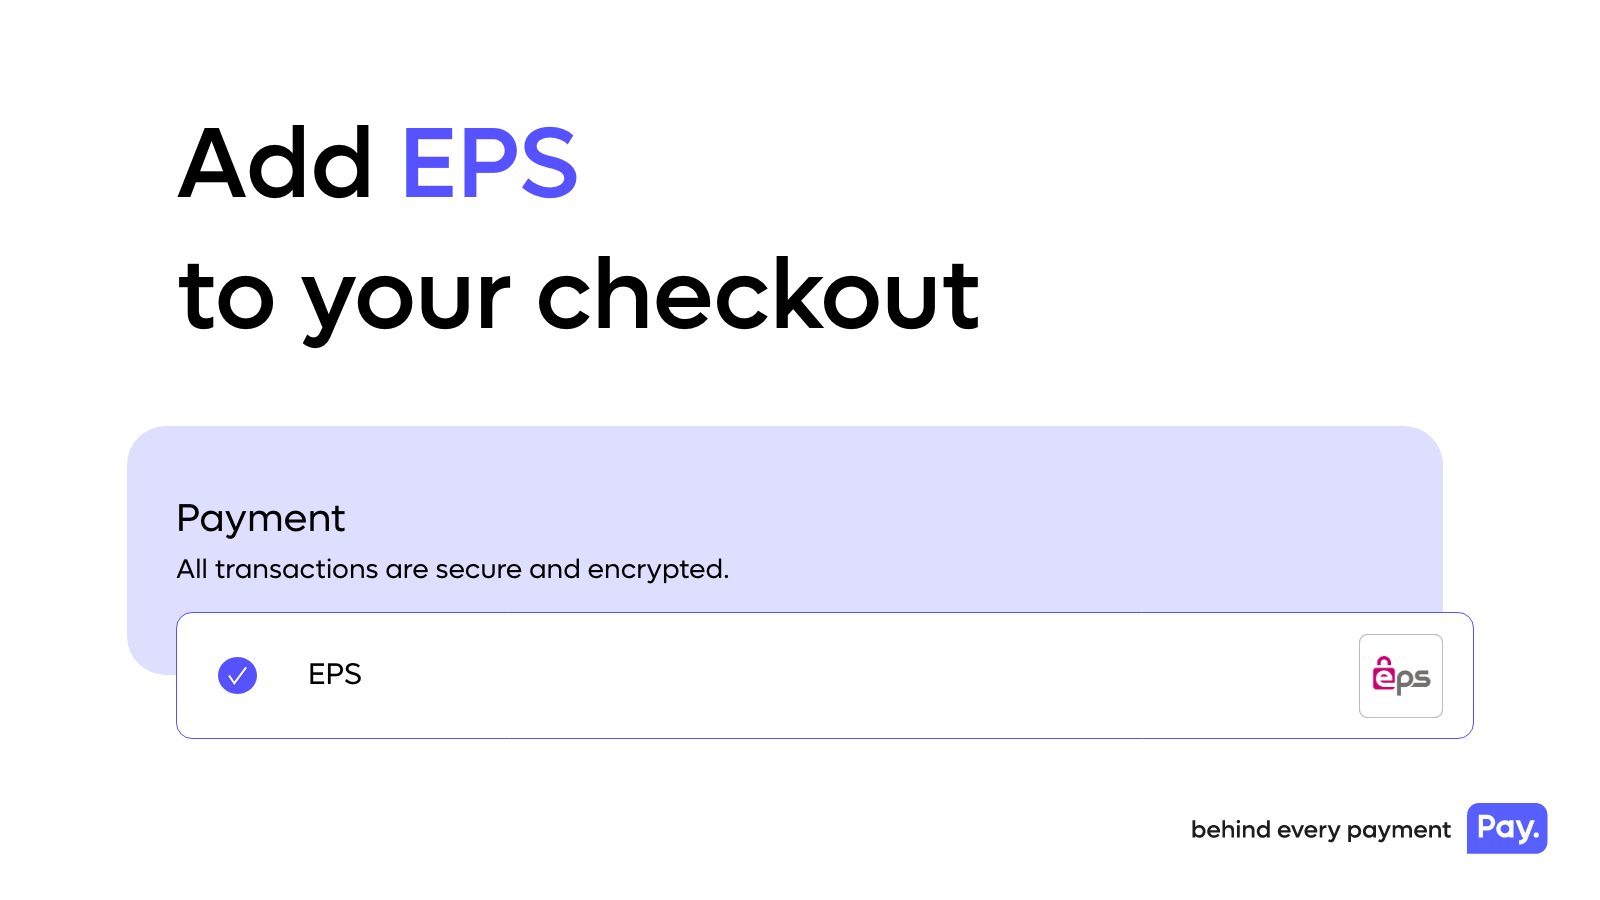 Add EPS to your checkout